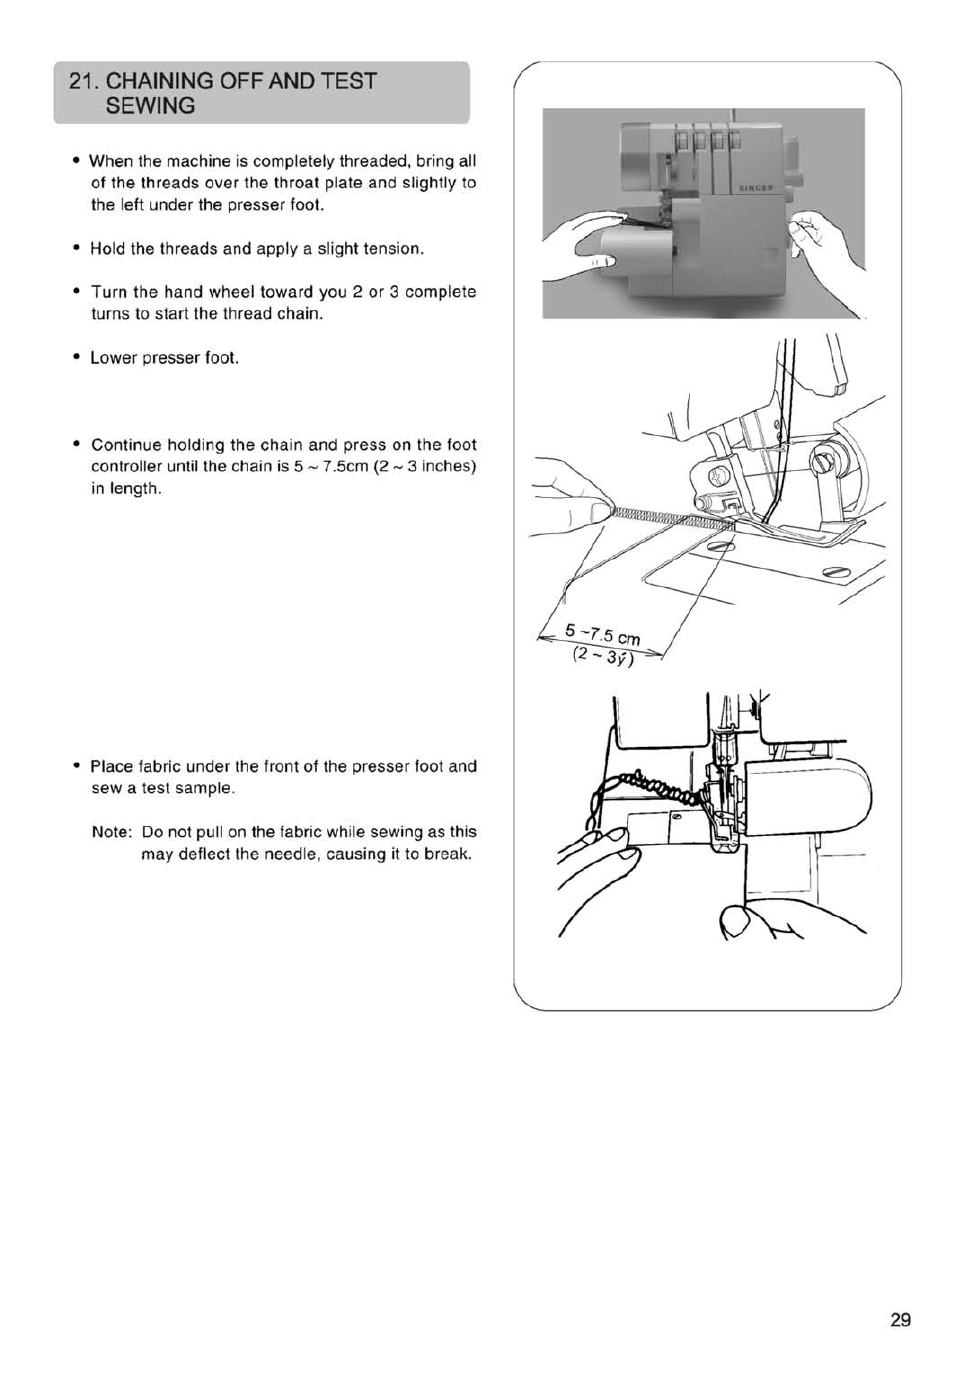 Chaining off and test sewing | SINGER 14SH754/14CG754 User Manual | Page 30 / 53